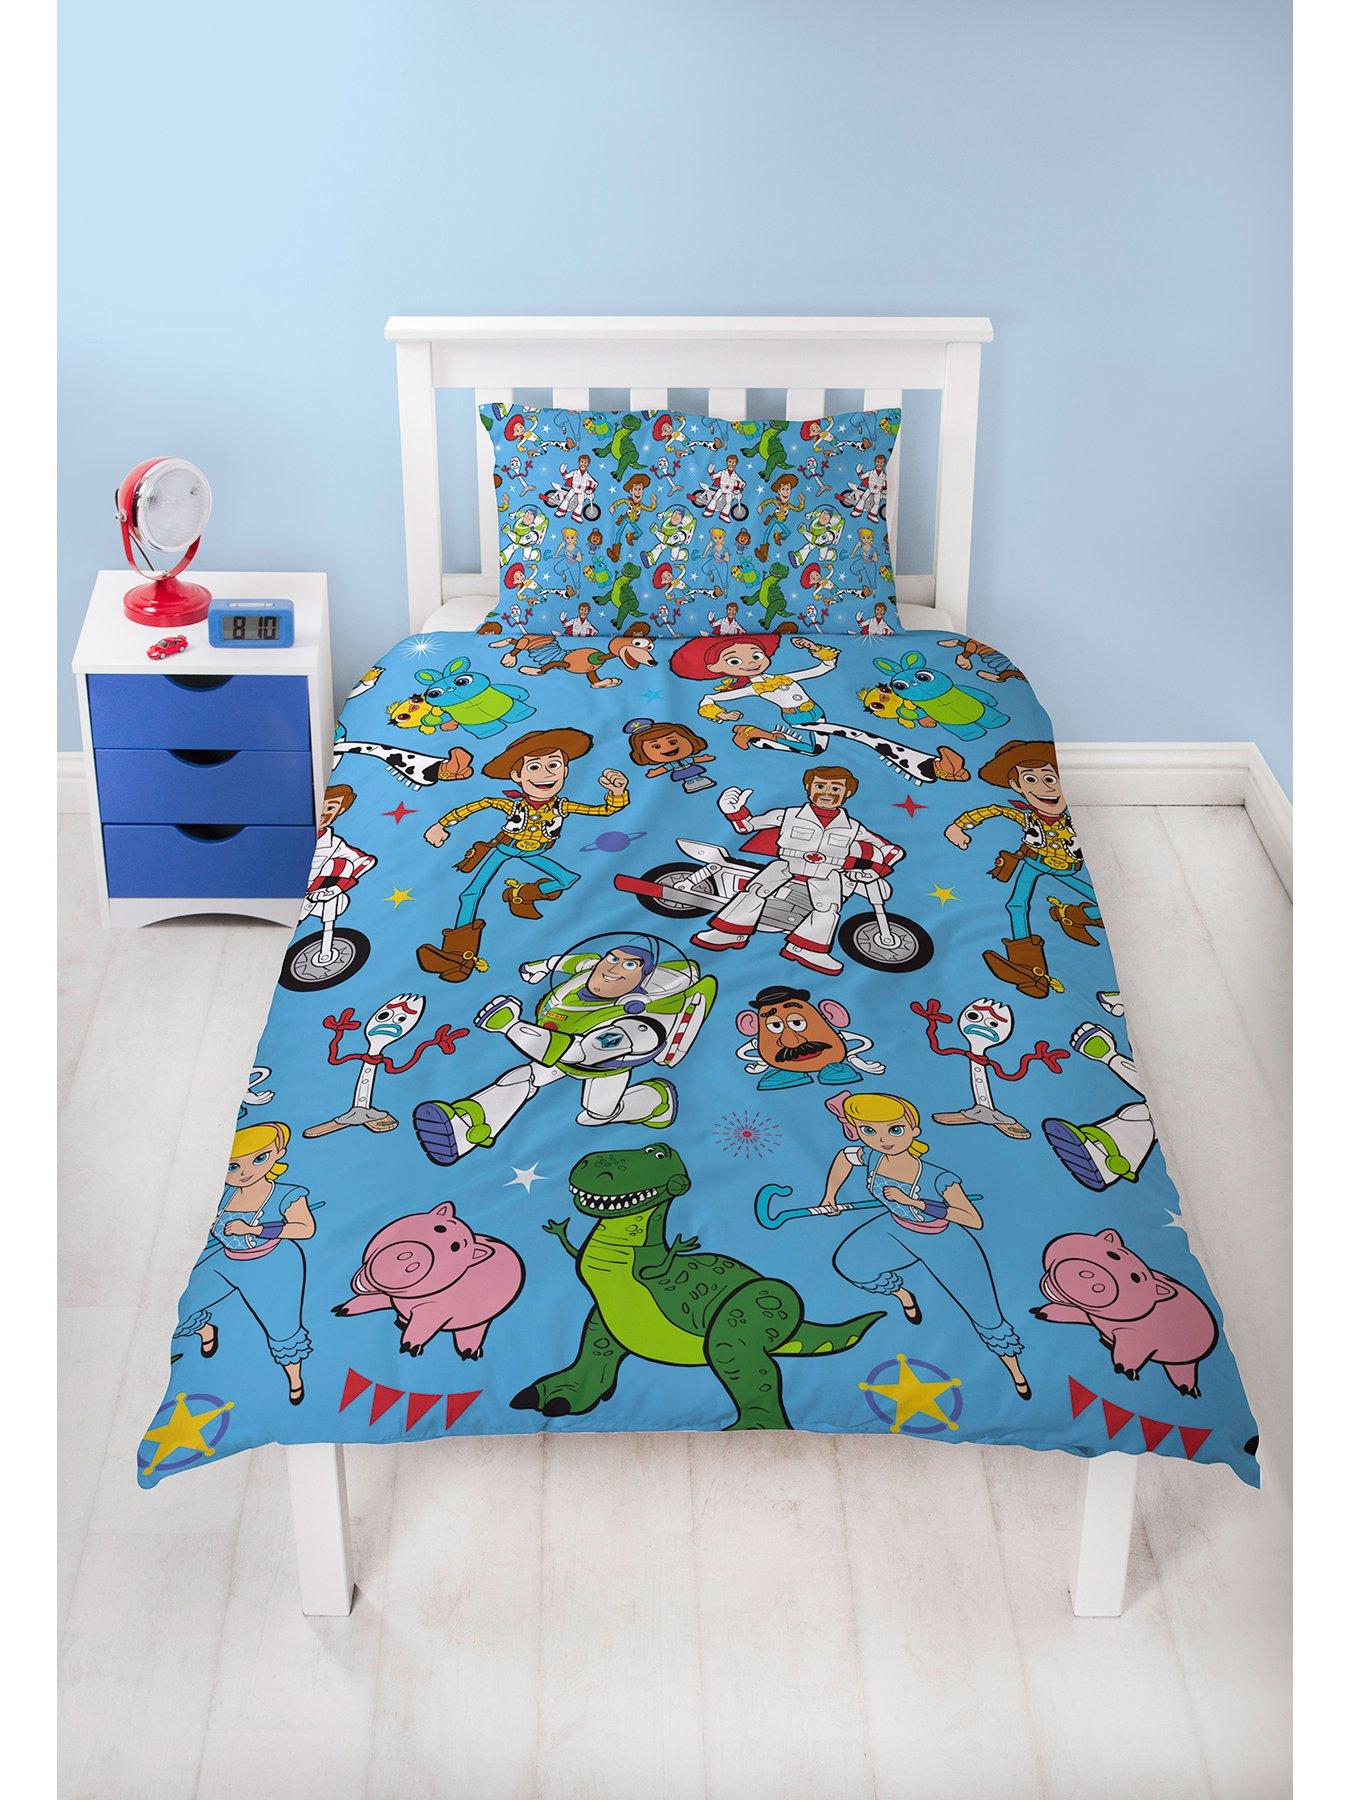 Polyester-Cotton Spiderman Ultimate Single Duvet Cover Set with Matching Pillow Case-Colourful Modern Design Perfect Children/’s Bedding White